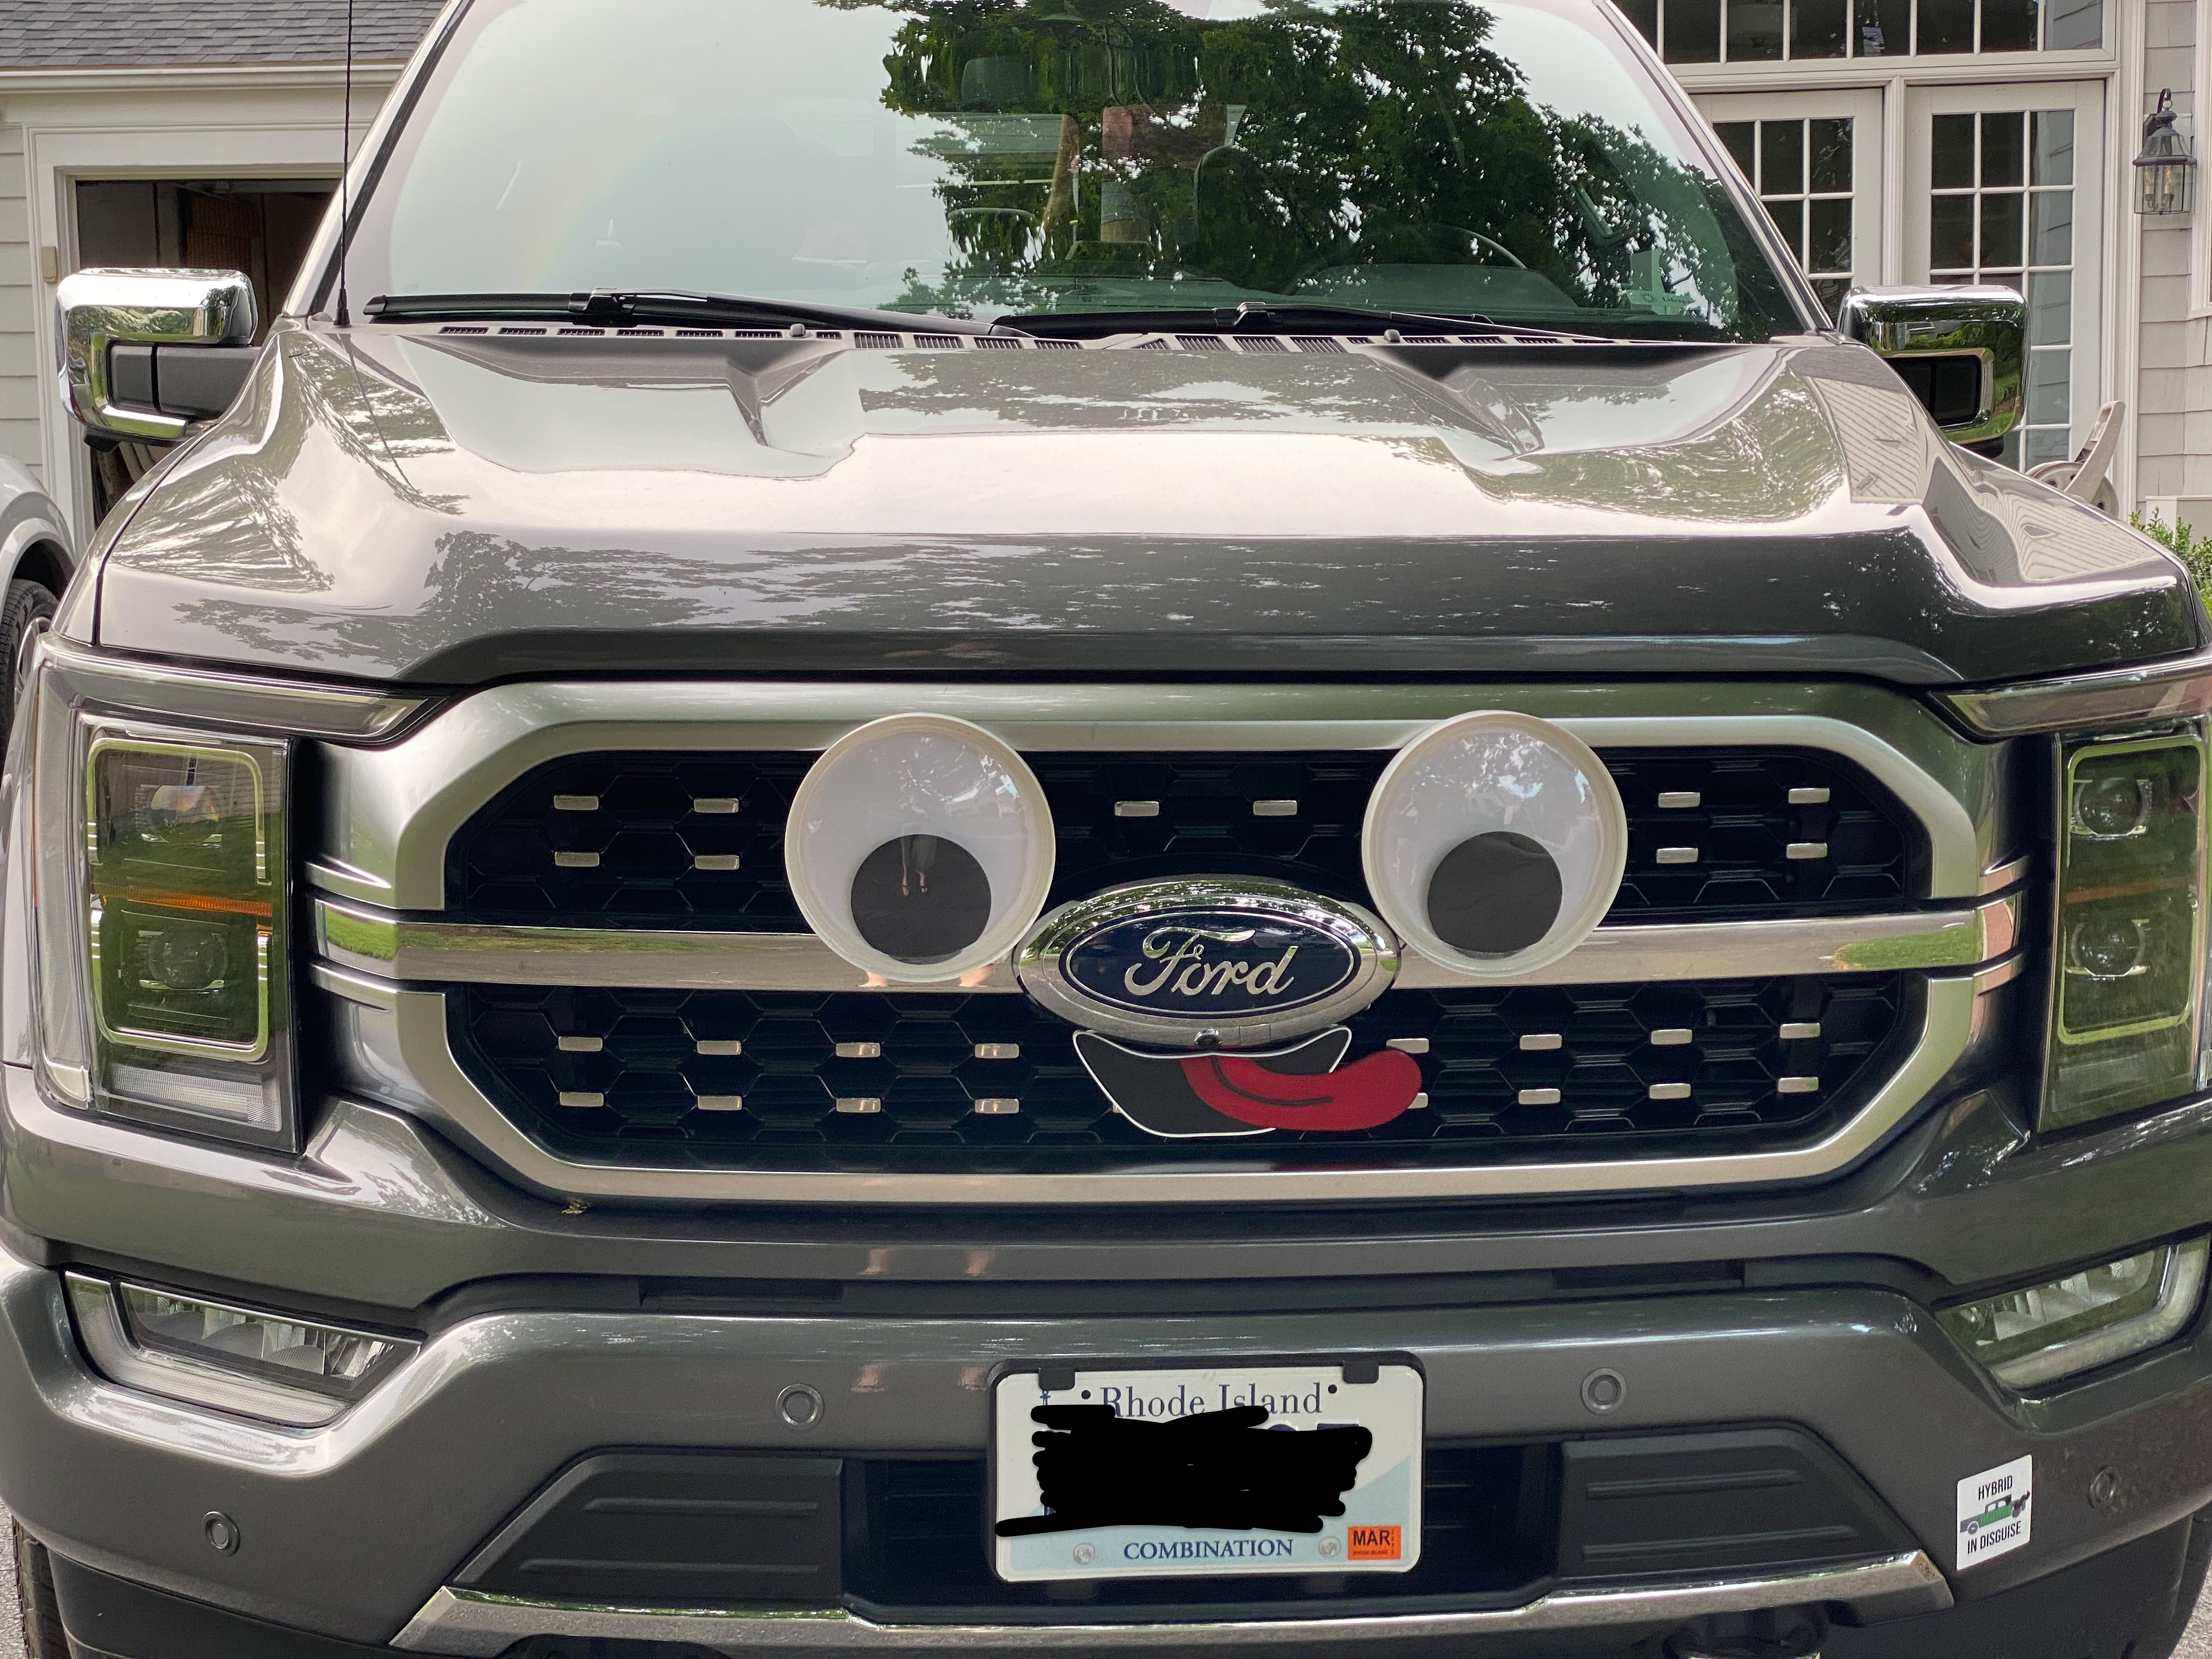 Googly Eye Face for a Pickup Truck